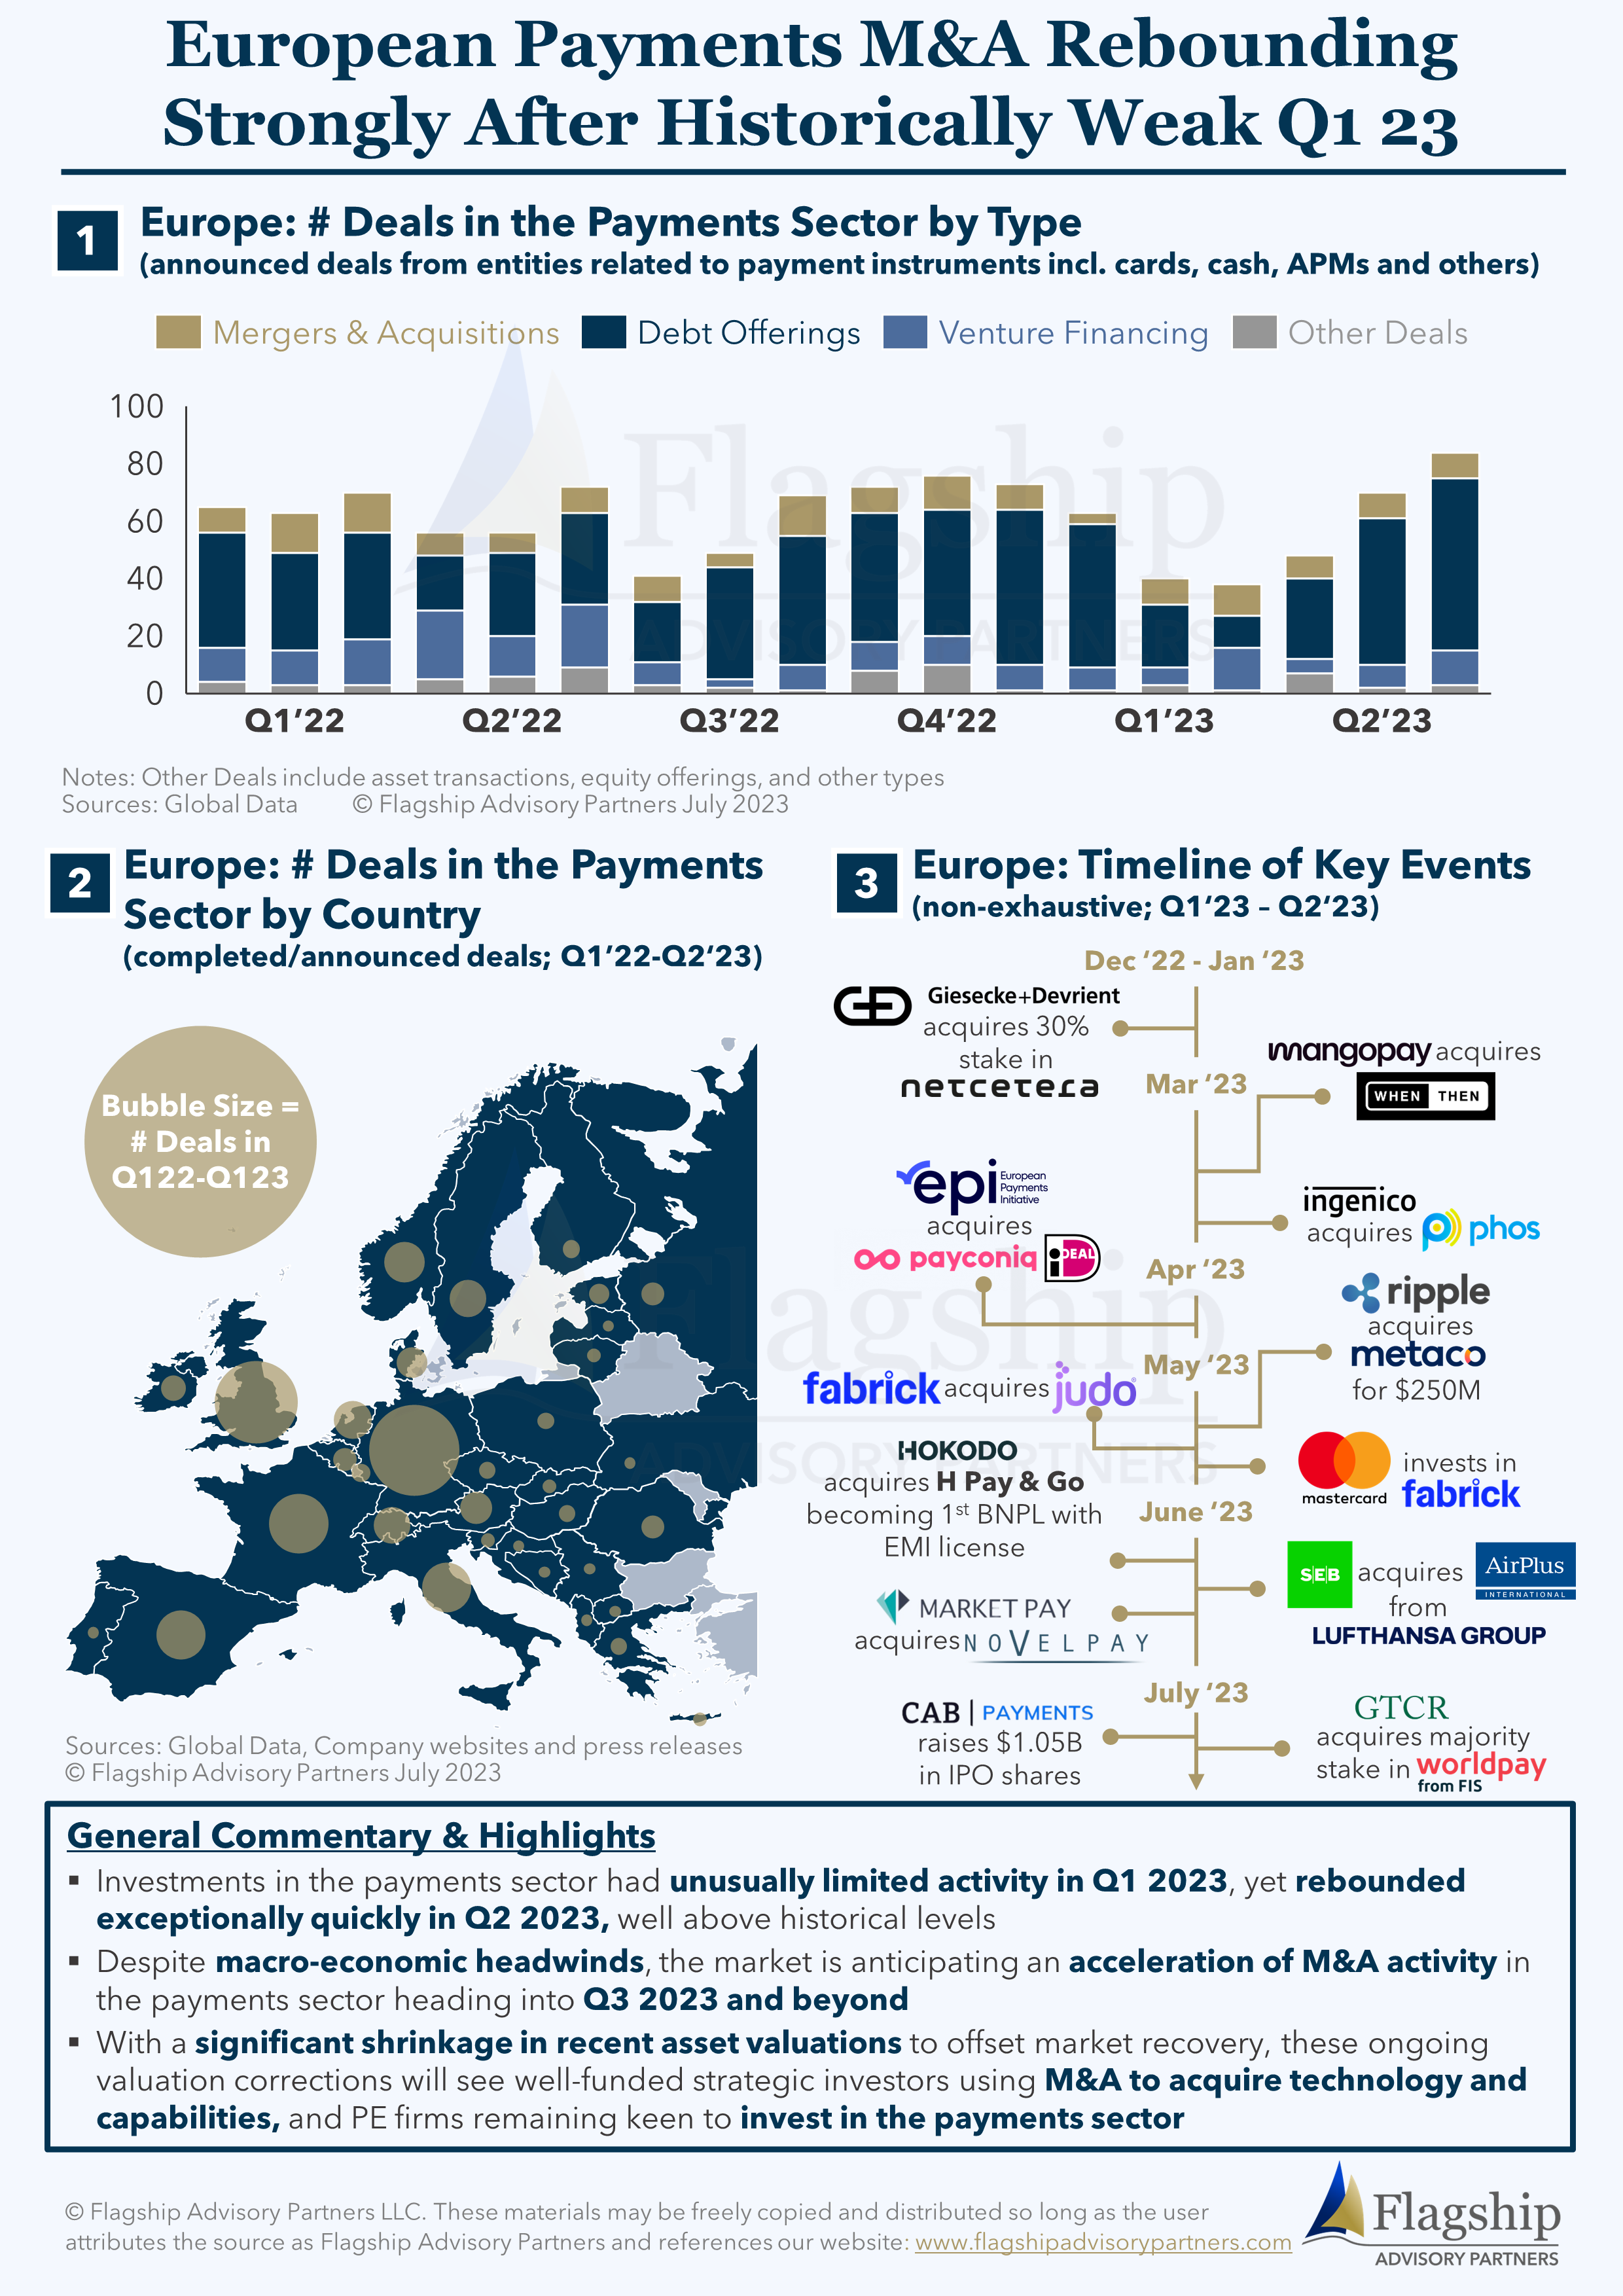 European Payments M&A Rebounding Strongly After Historically Weak Q1 23_28July2023